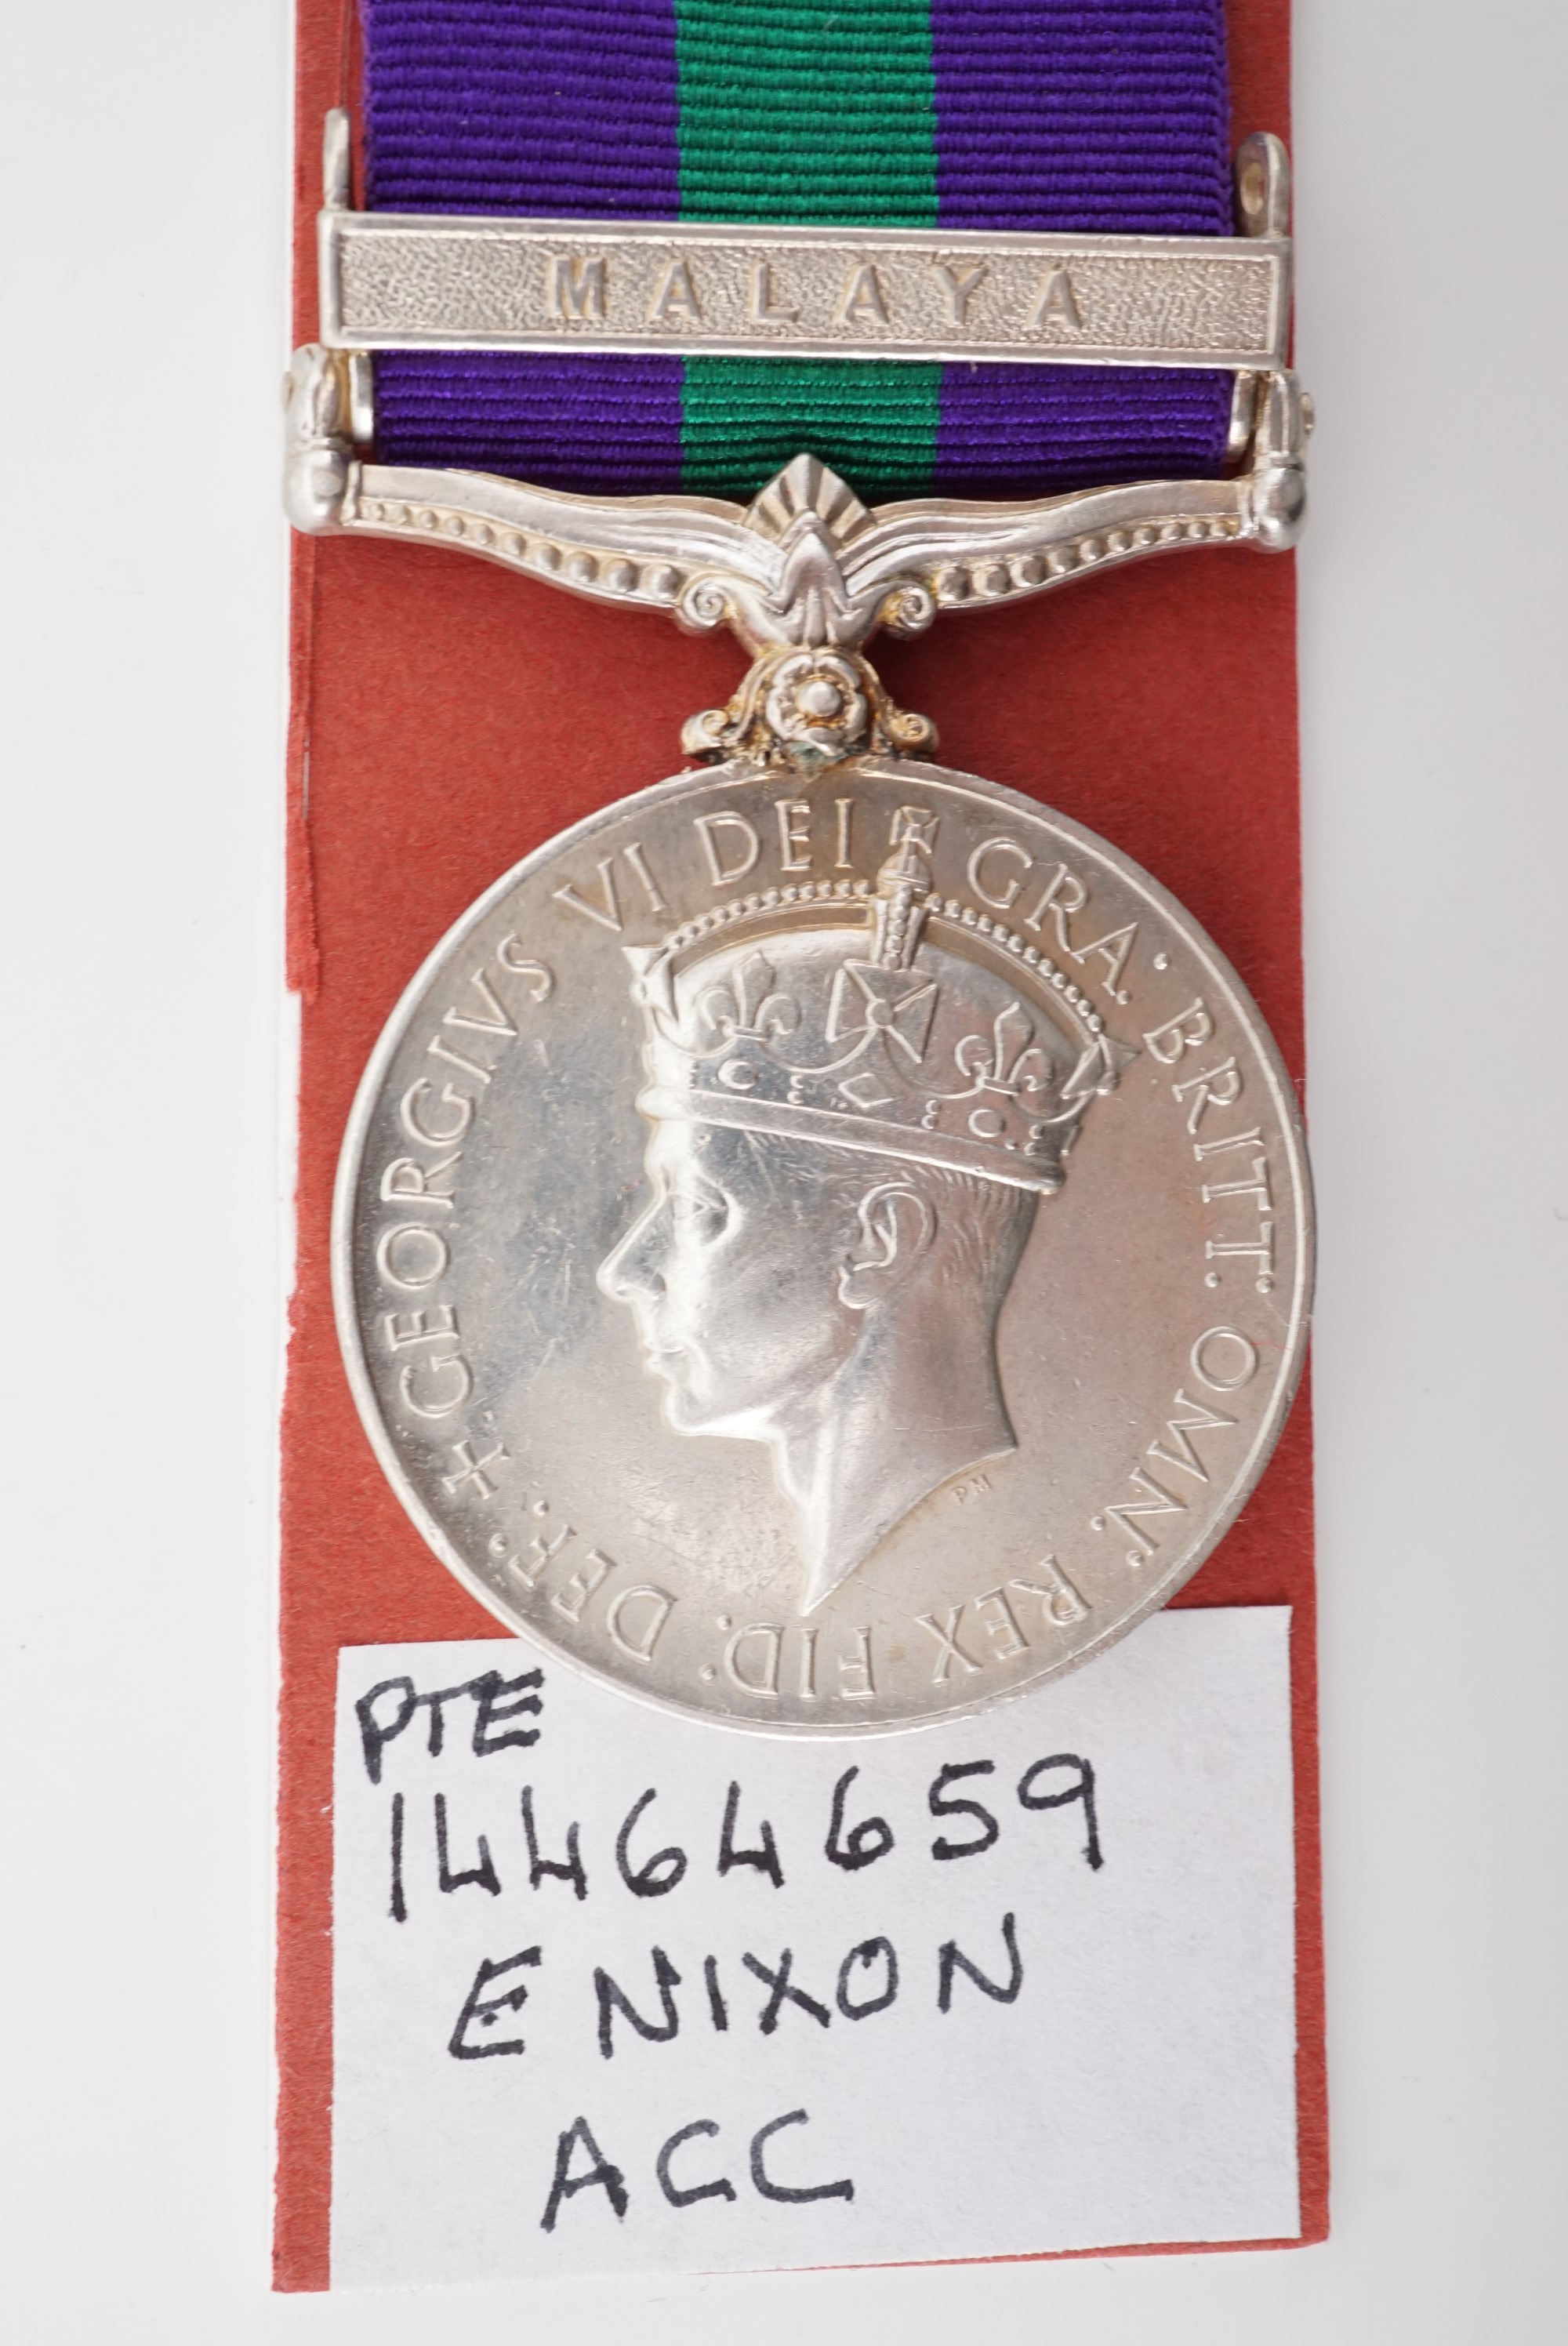 A George VI General Service Medal with Malaya clasp to 14464659 Pte A Nixon, ACC - Image 2 of 4